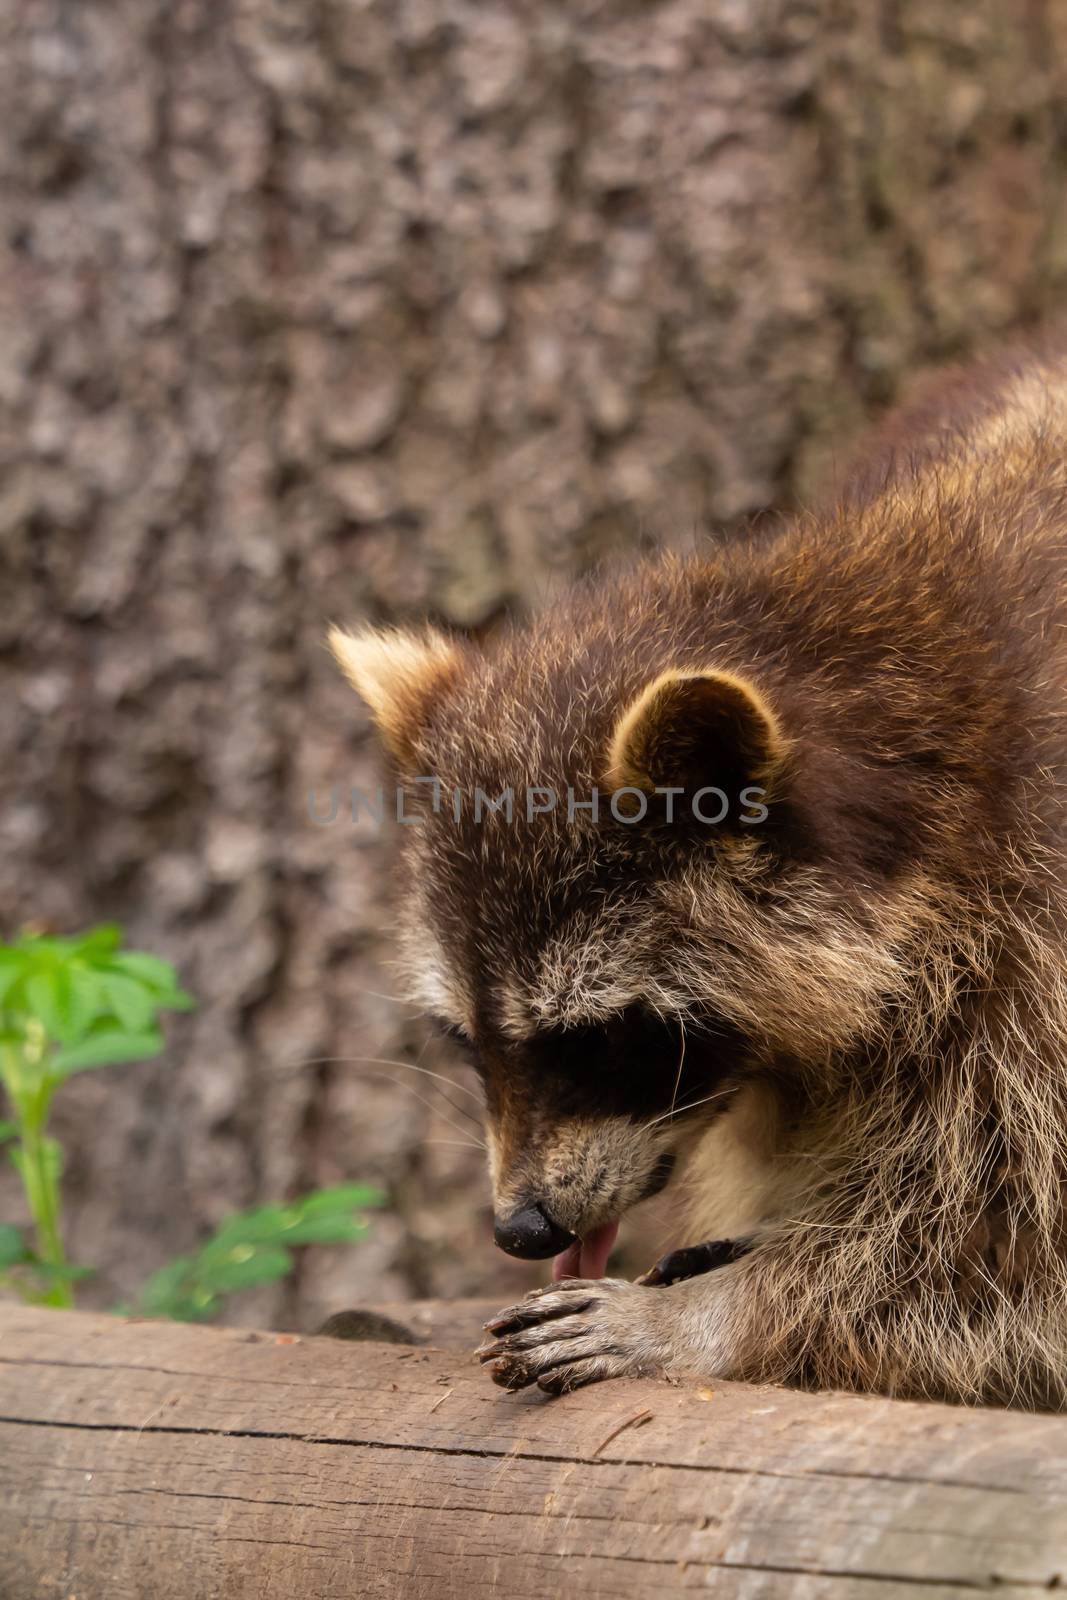 A raccoon is eating something outdoor by sandra_fotodesign